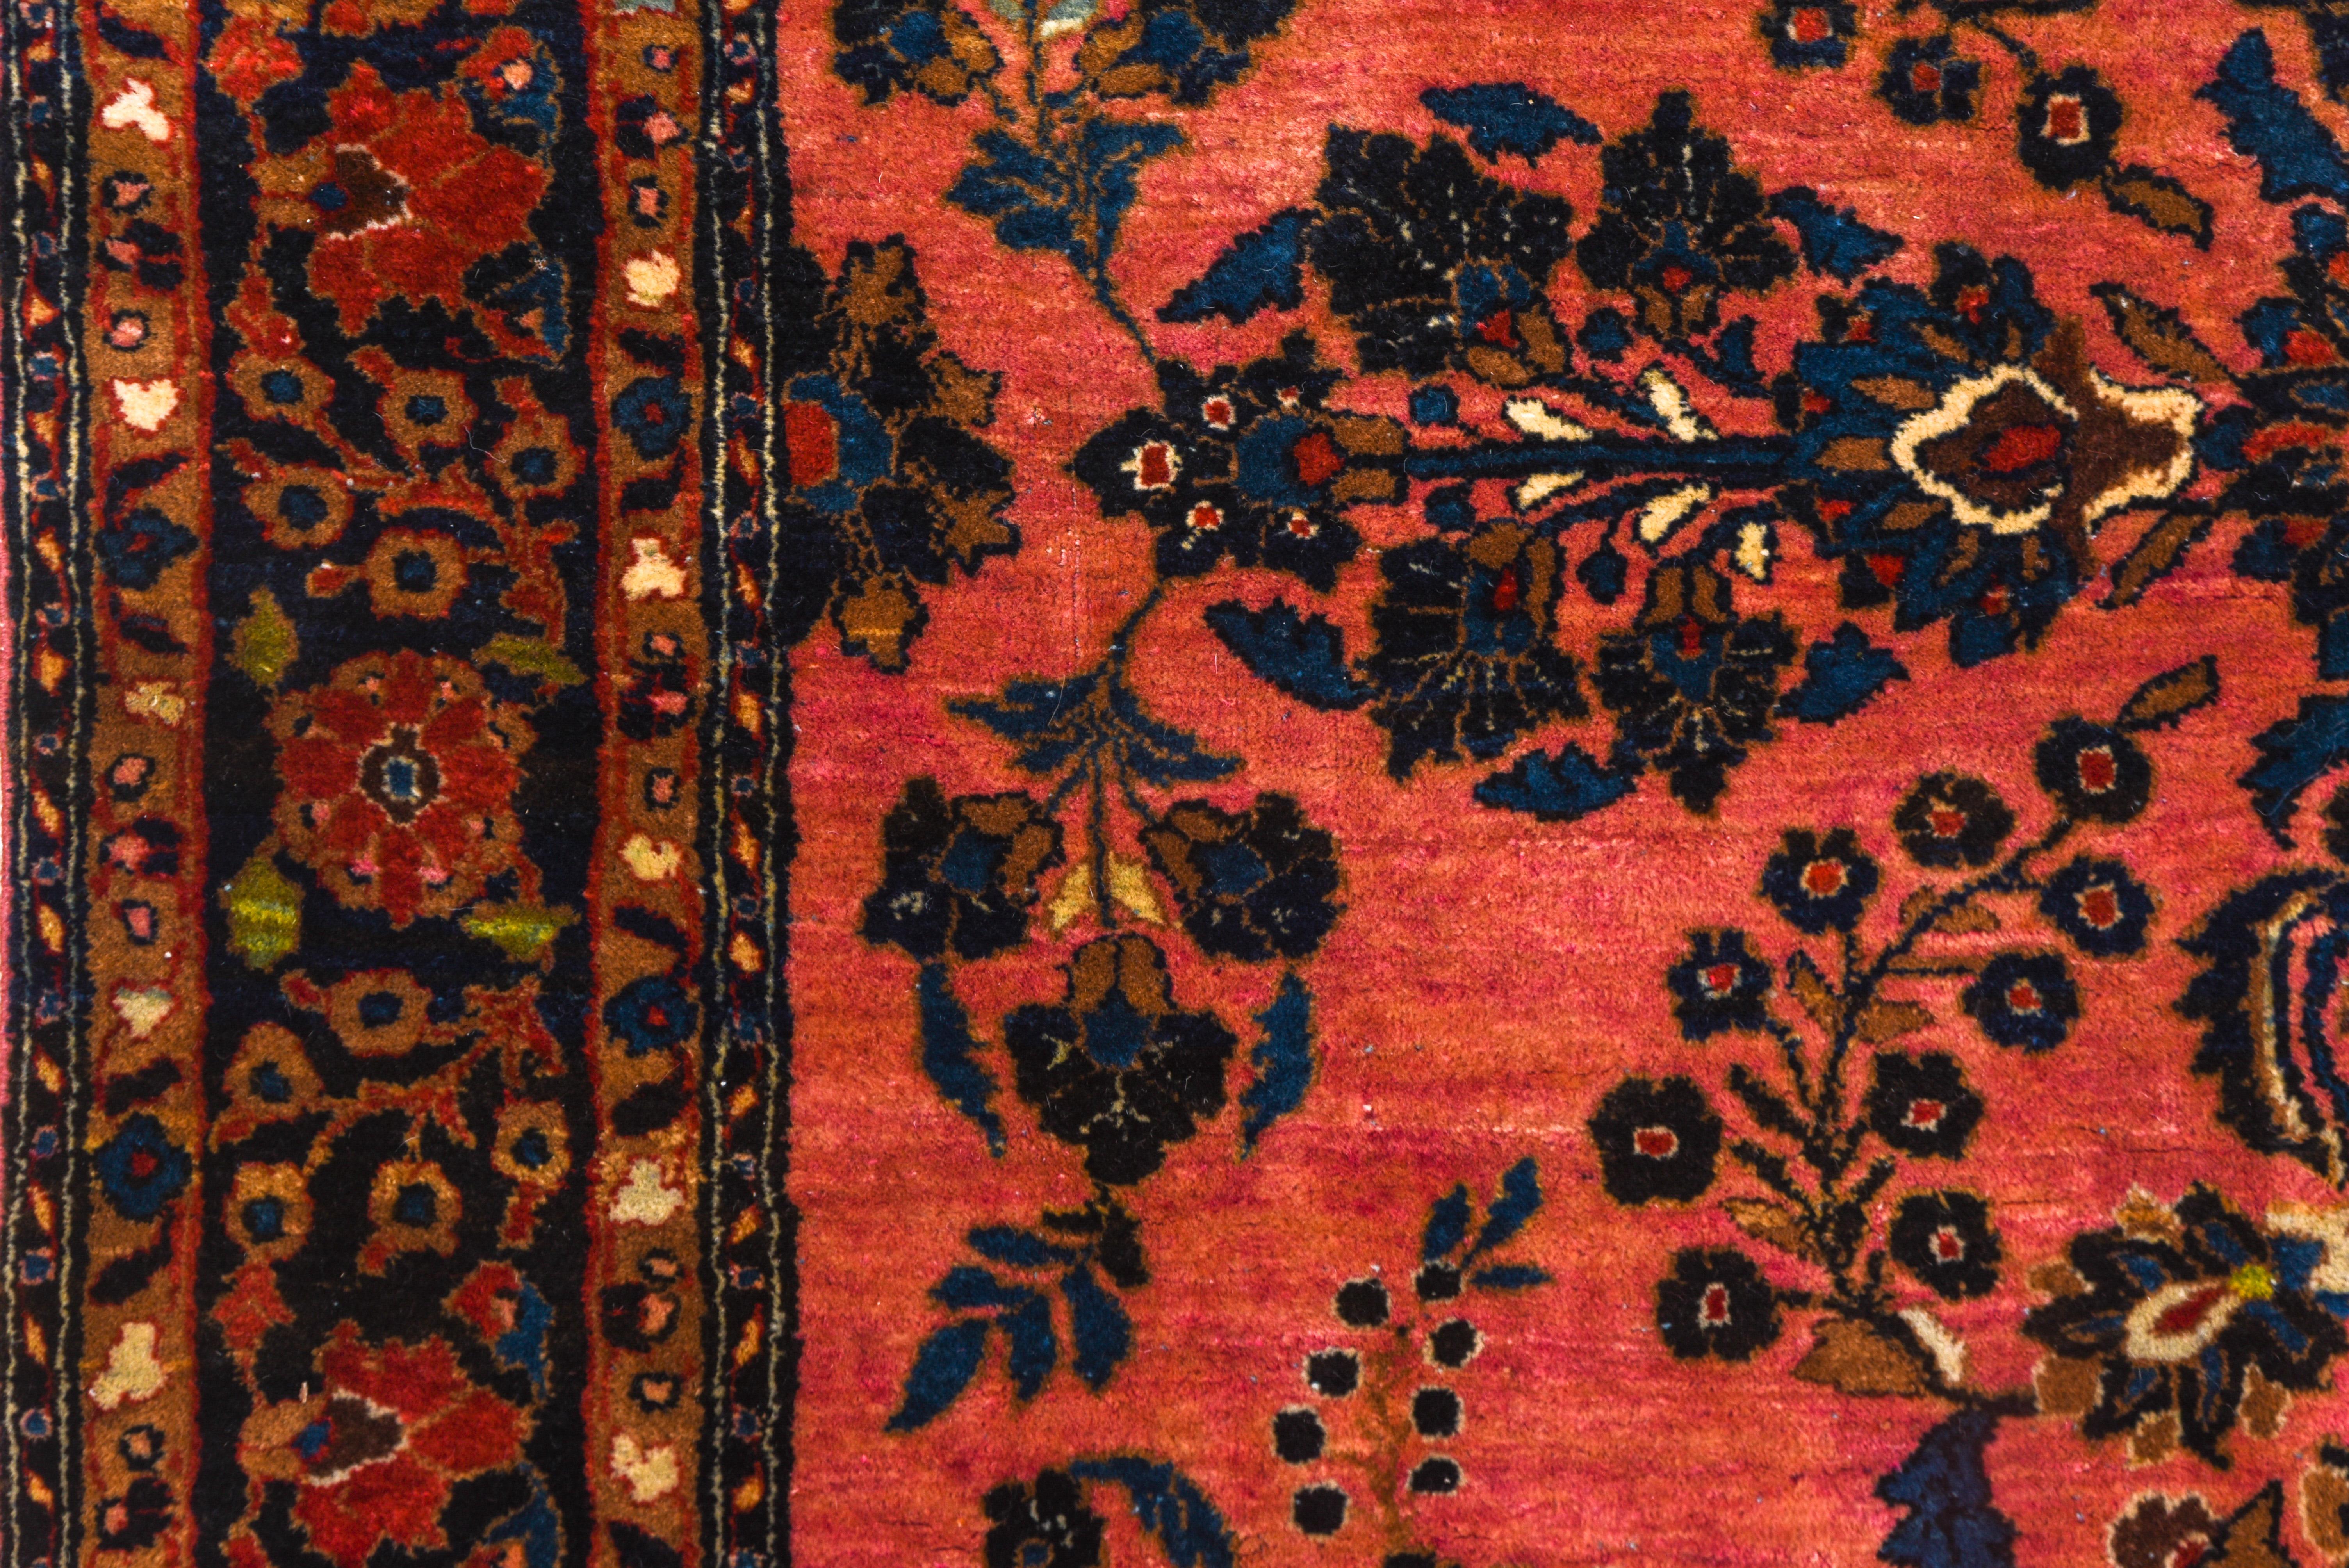 Antique Persian Sarouk Rug, Hot Pink Field, Navy Borders, circa 9s0 In Good Condition For Sale In New York, NY